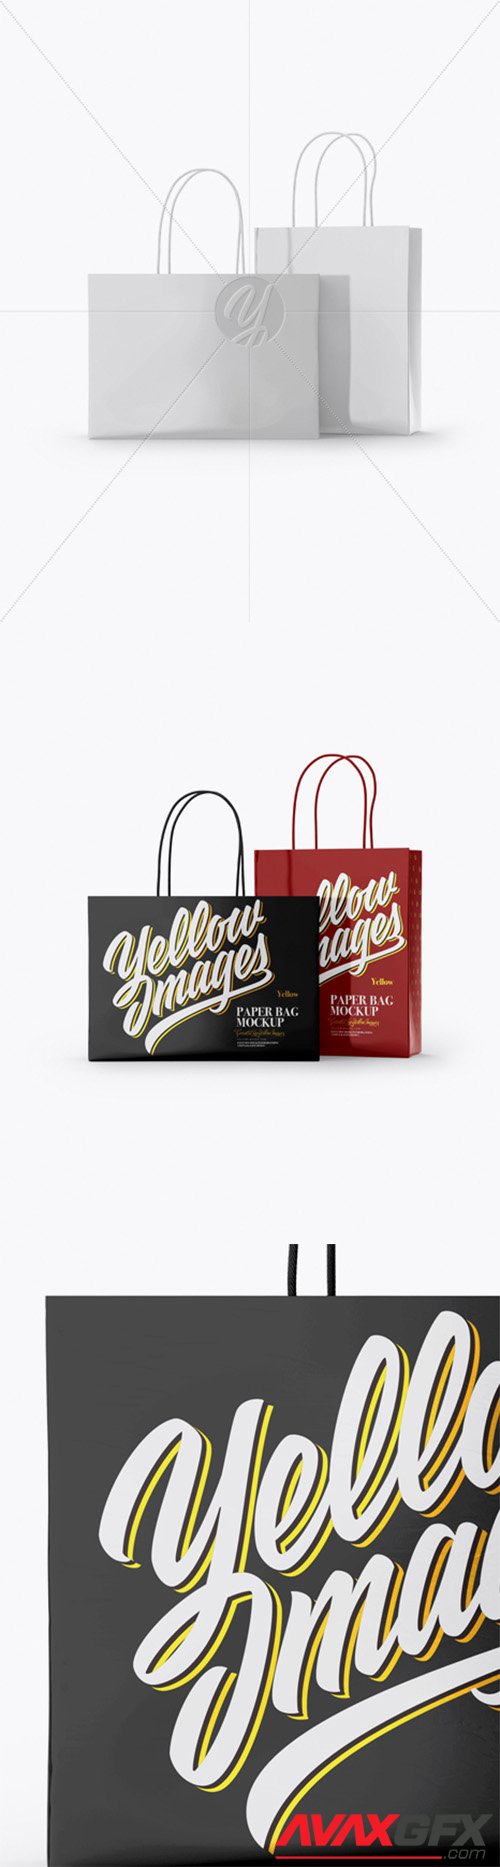 Two Glossy Paper Bags Mockup - Half Side View 27881